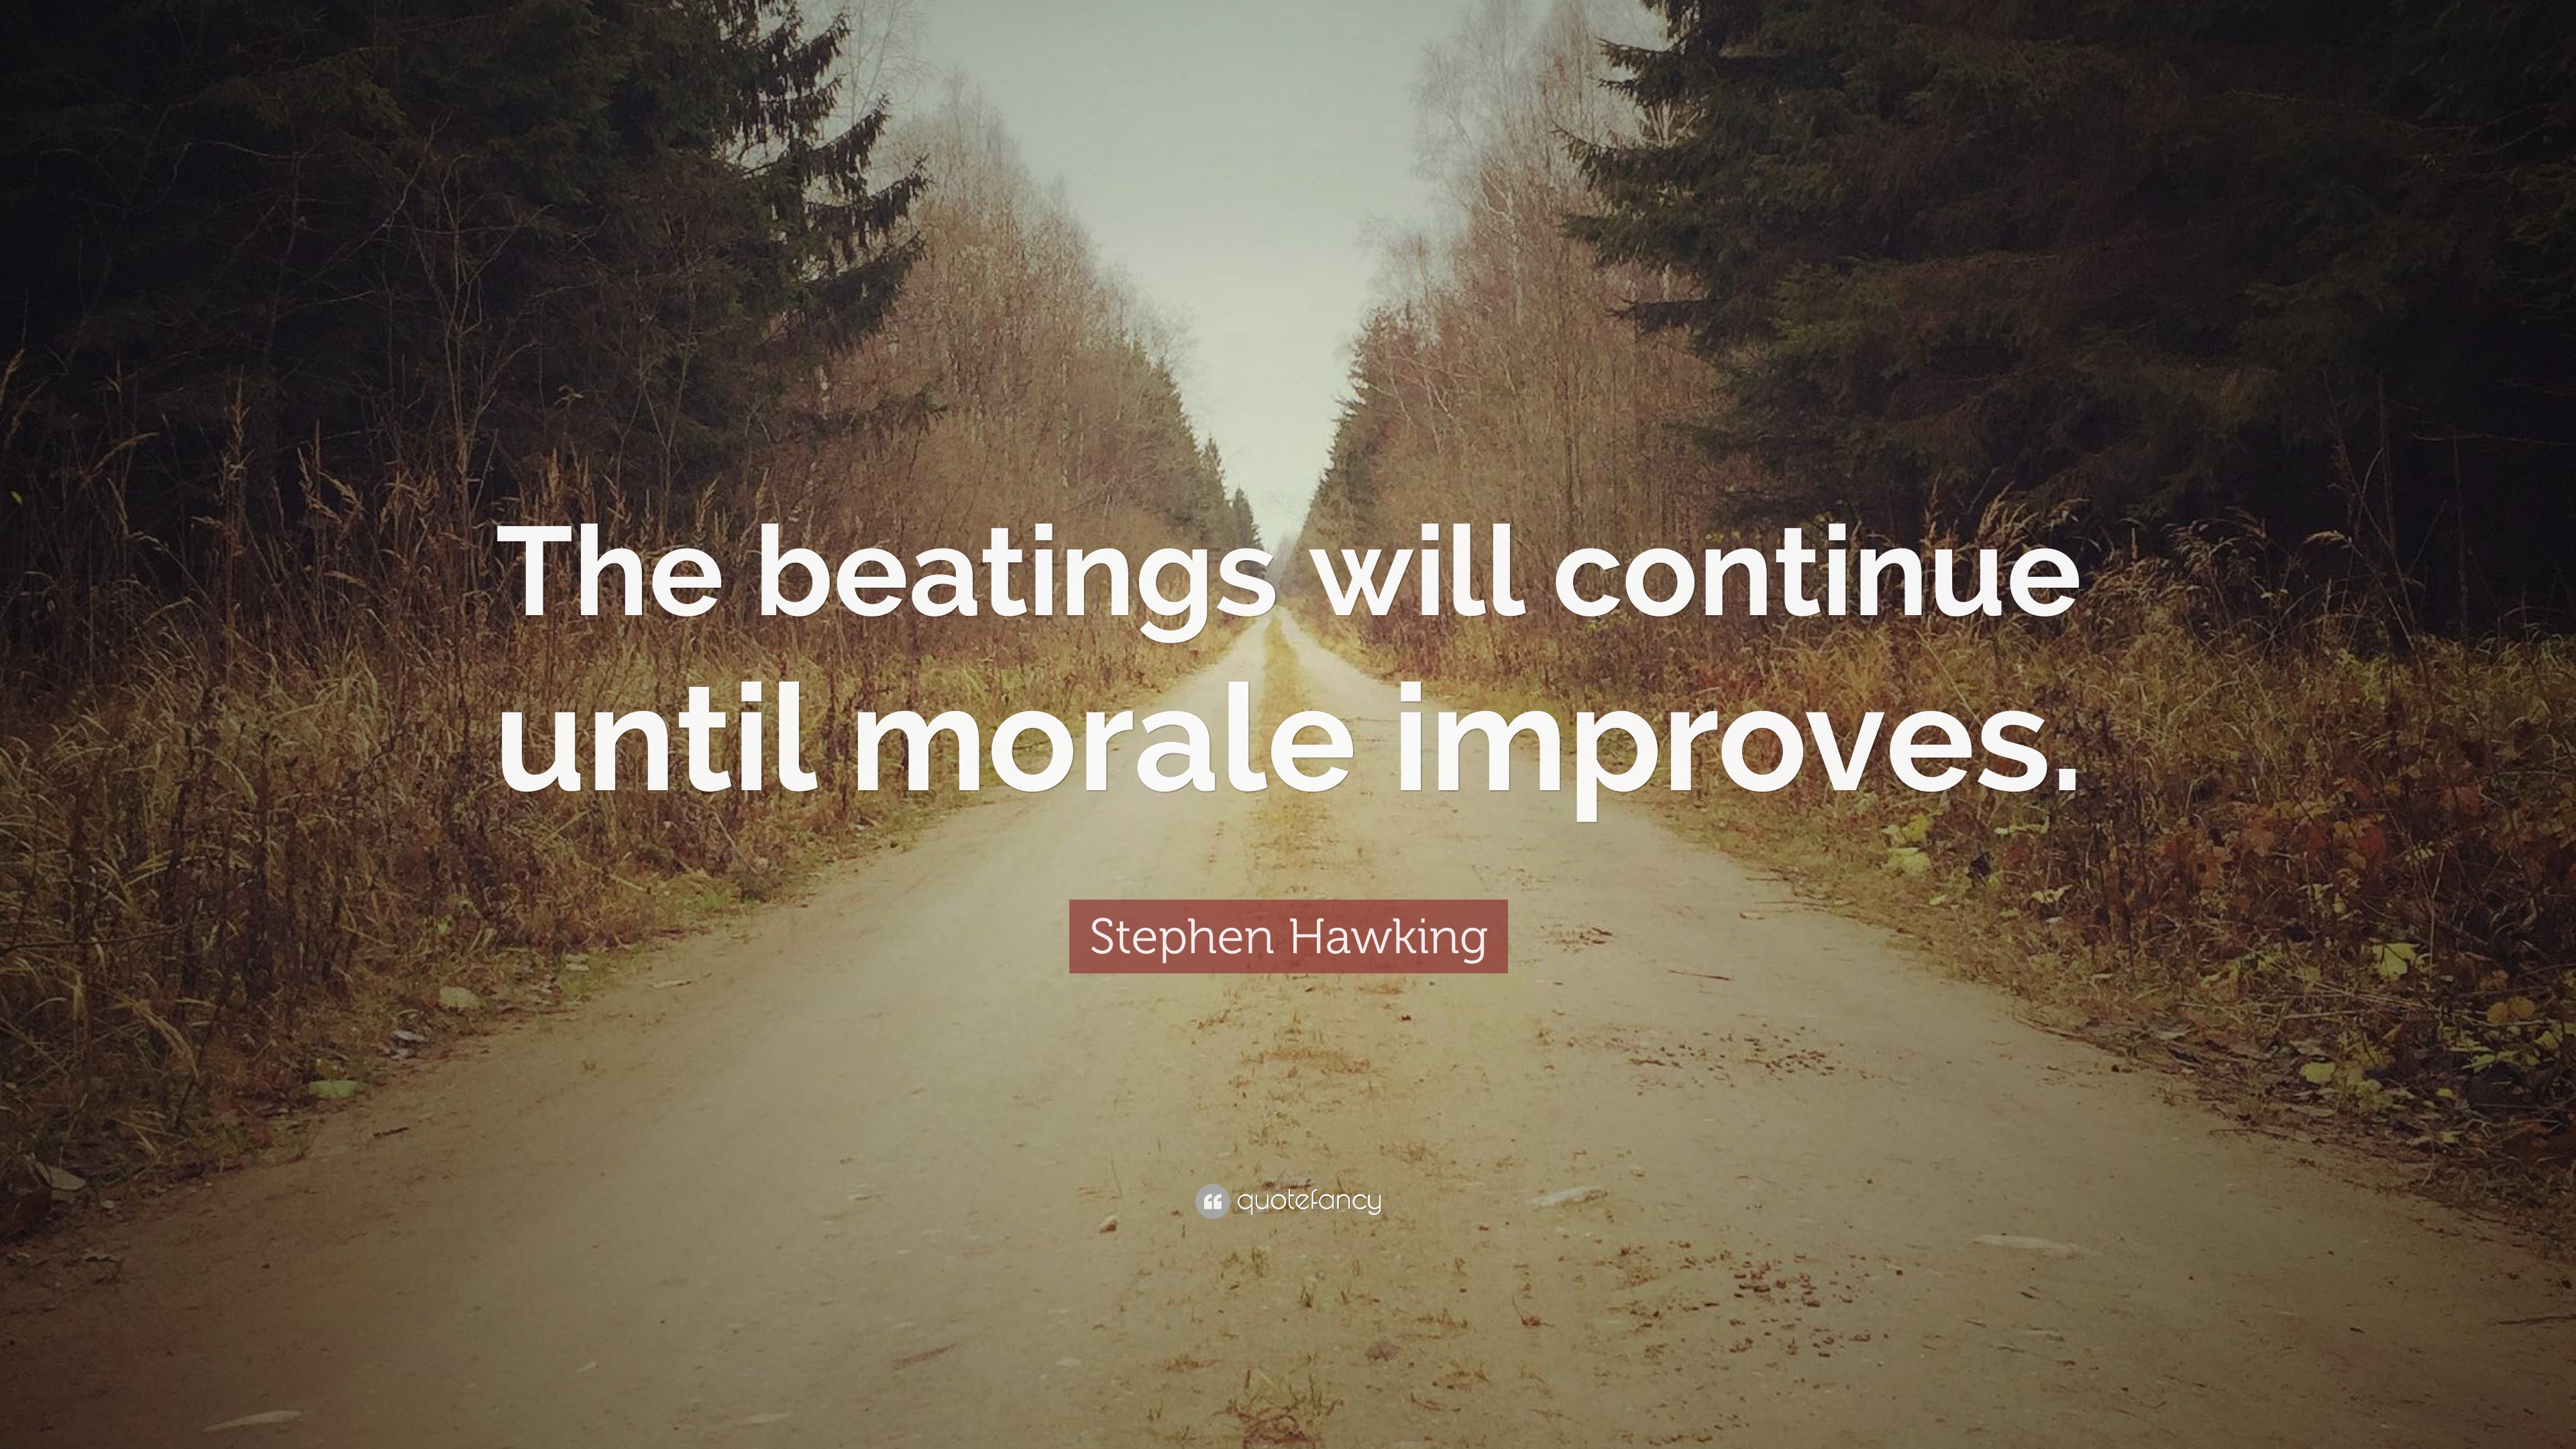 https://quotefancy.com/media/wallpaper/3840x2160/2028330-Stephen-Hawking-Quote-The-beatings-will-continue-until-morale.jpg